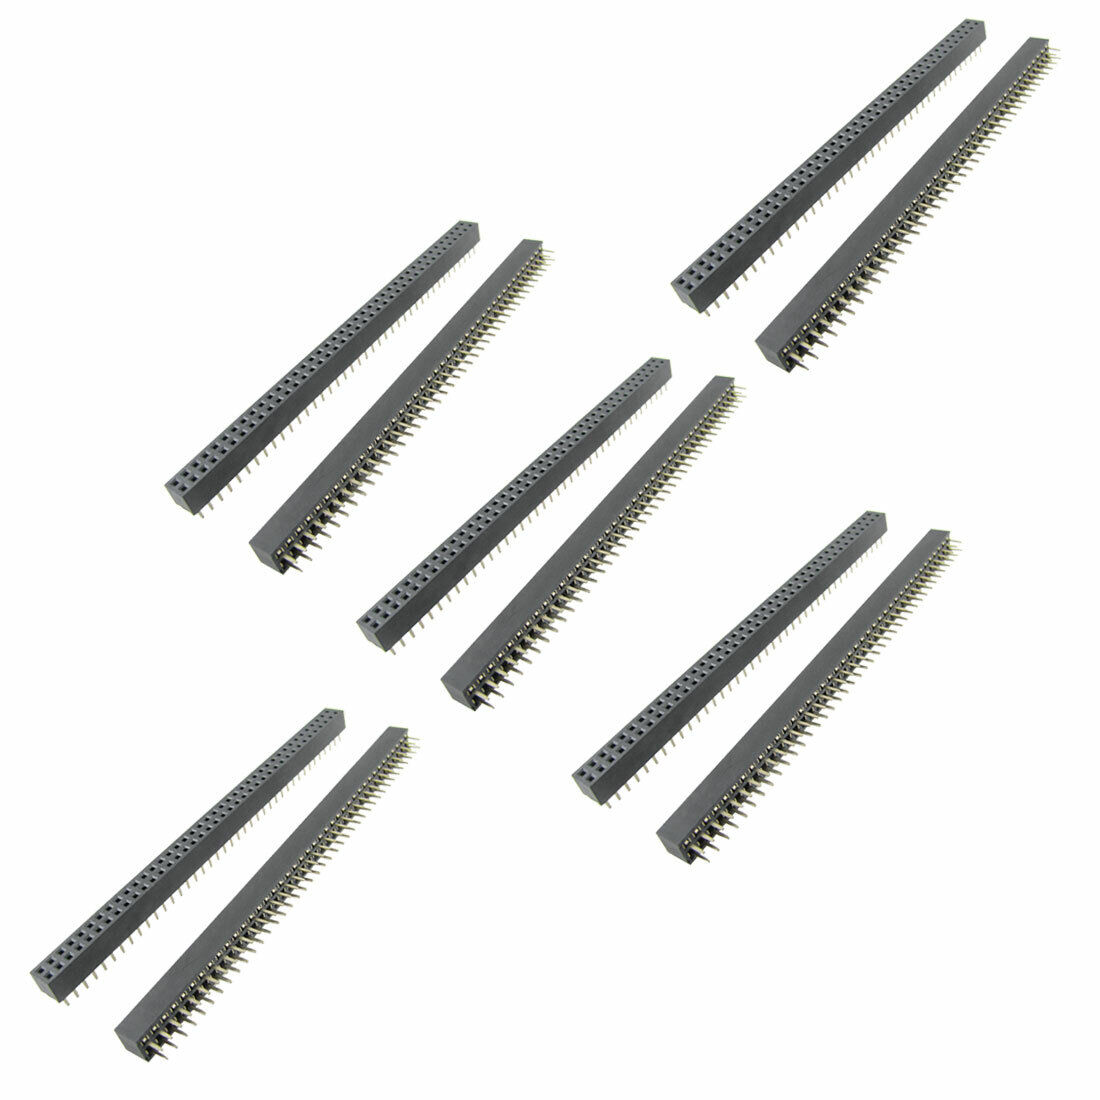 10x 2.0mm Pitch 2x40 Pin Straight PCB Connector Pin Headers Strip